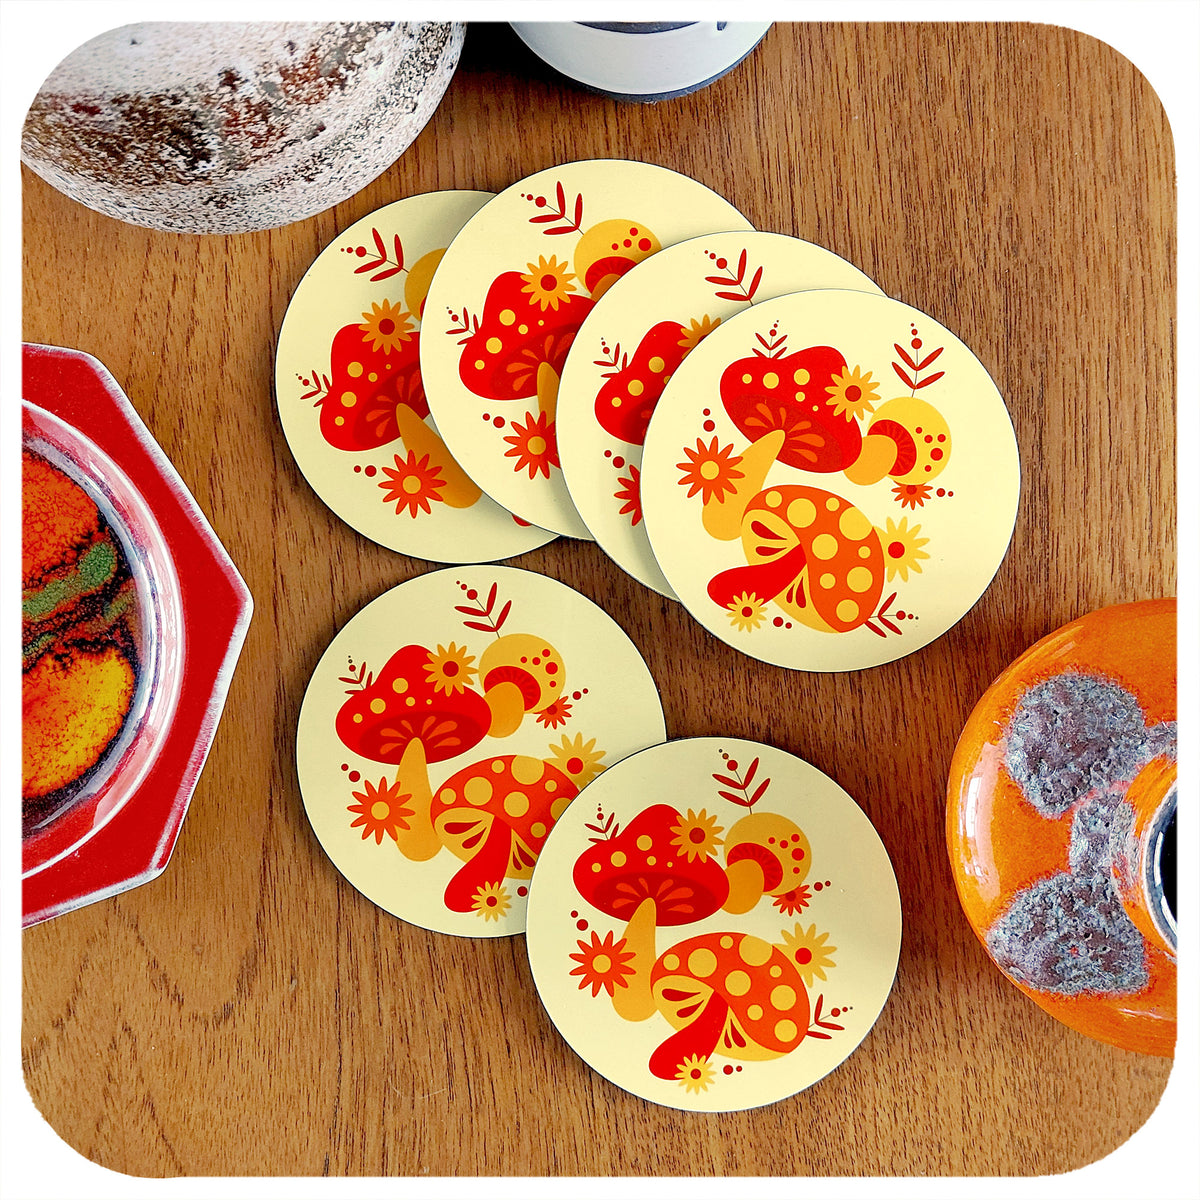 Set of 6 70s style retro coasters featuring orange, red & yellow mushrooms. They are lying on a teak table with various vintage pottery pieces around the edge of the frame. | The Inkabilly Emporium